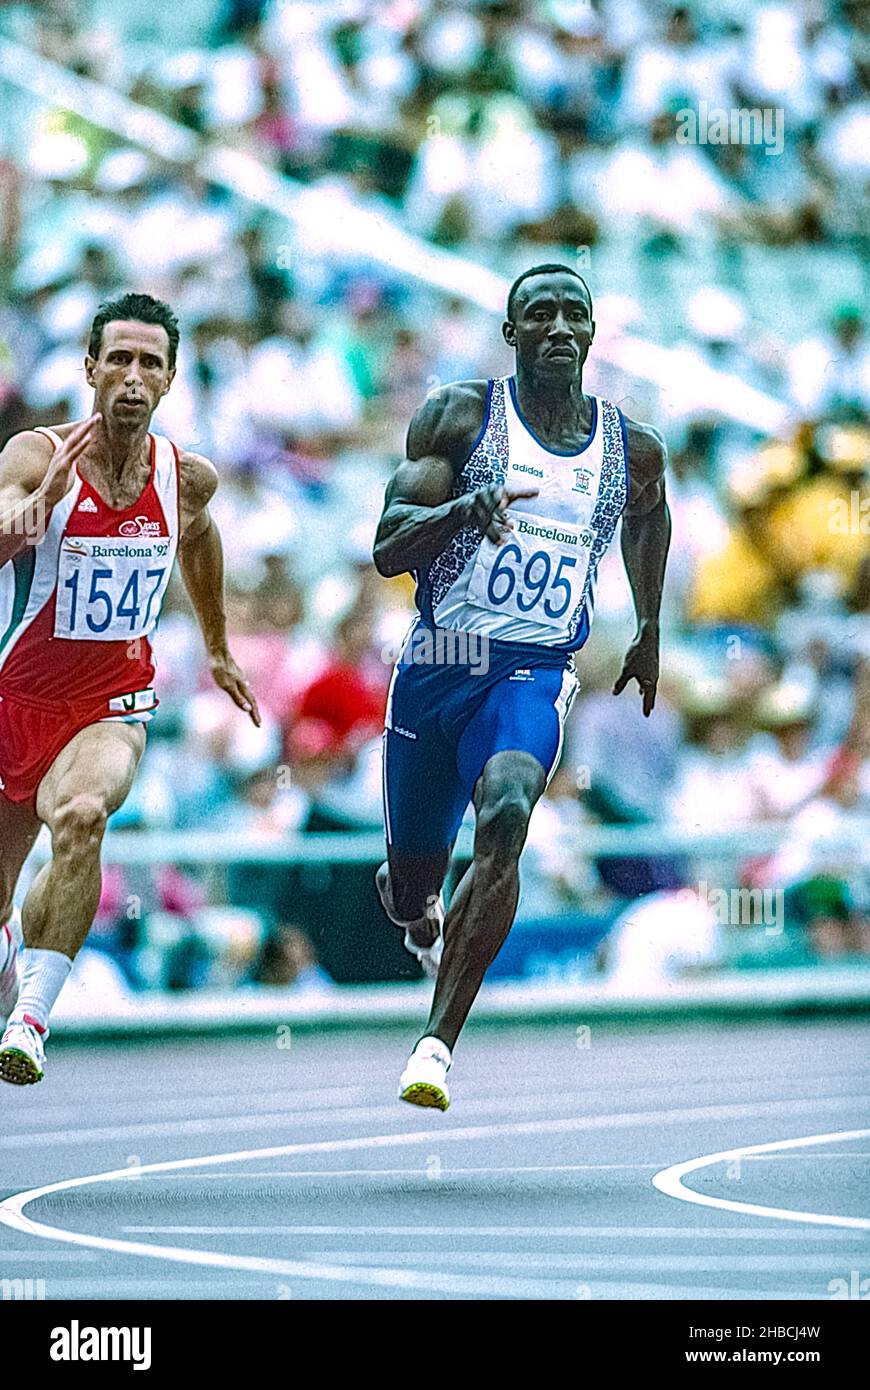 Linford Christie (GBR) #695 and Stefan Burkart (SUI) #1547 competing in the men's 200m R1 at the 1992 Olympic Summer Games. Stock Photo